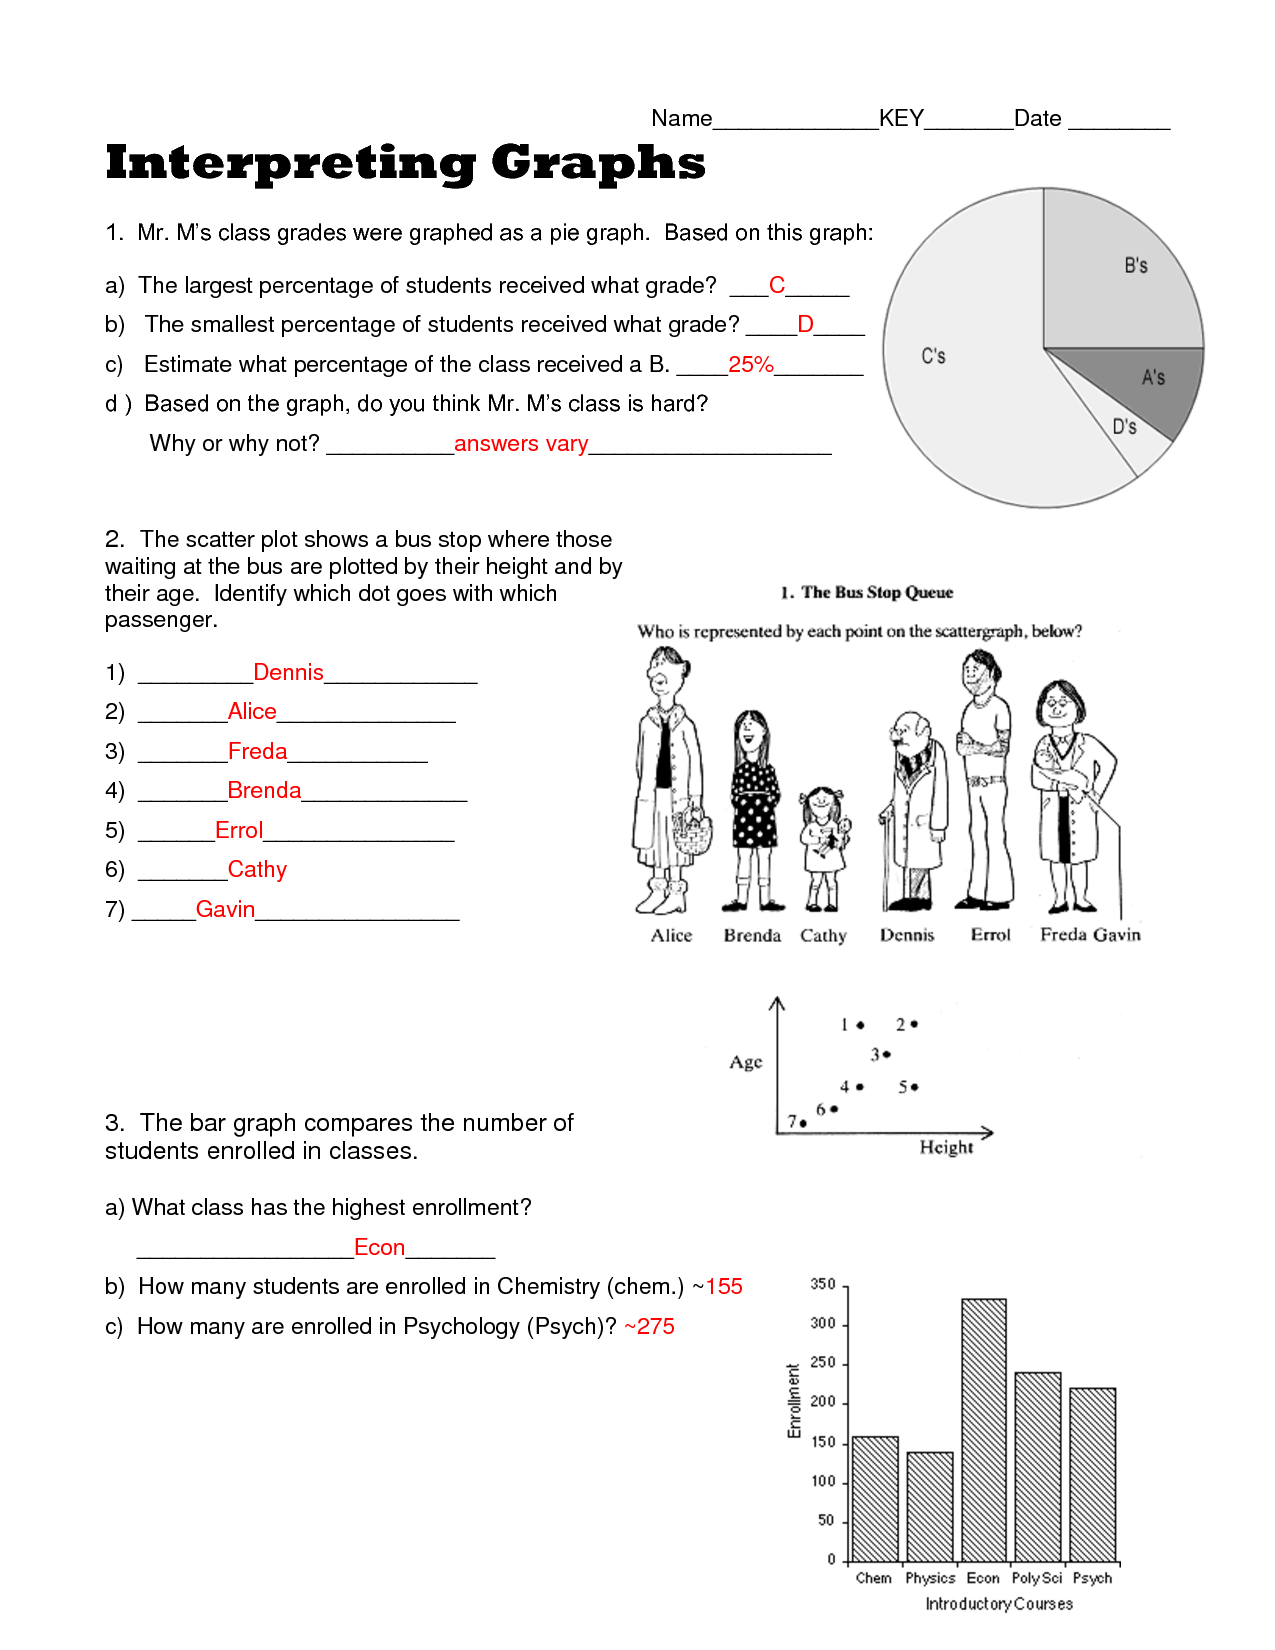 Reading Charts And Graphs Worksheets Middle School